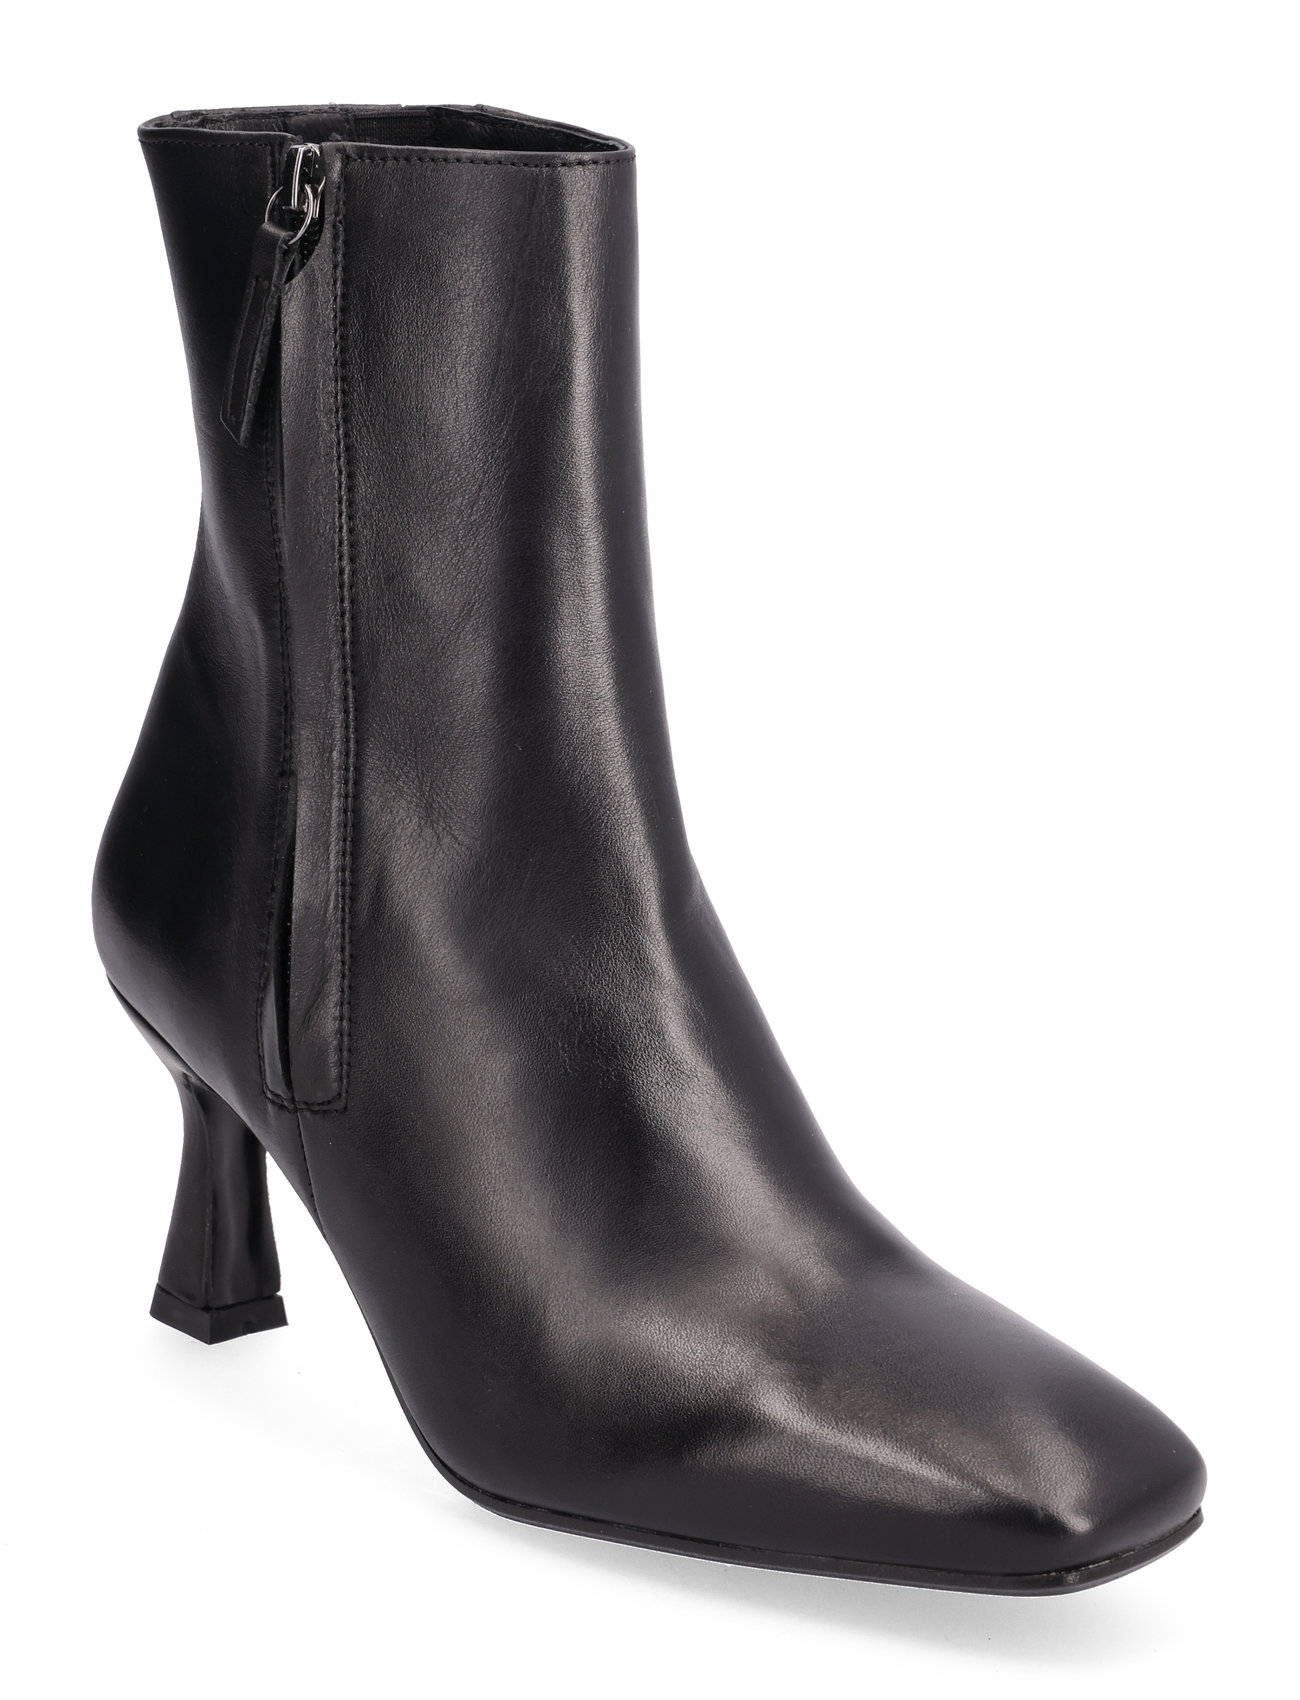 Maya Shoes Boots Ankle Boots Ankle Boots With Heel Black Pavement